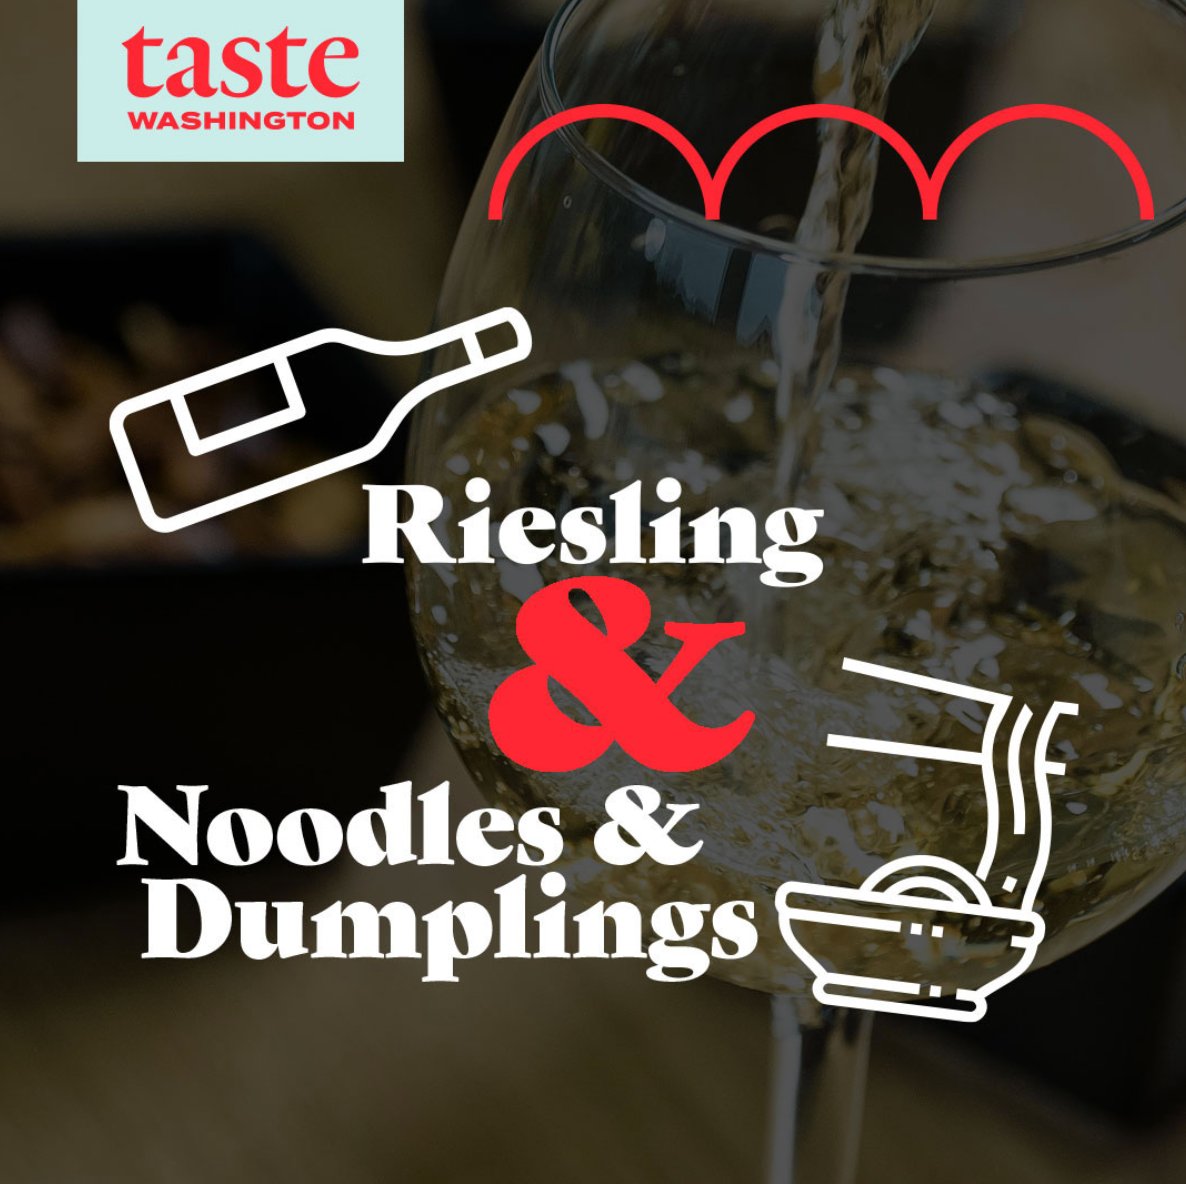 It's the last week of #TasteWA Wine Month: Riesling + Noodles & Dumplings 😍🍷⠀⠀⠀ .⠀⠀⠀ Are you Team To Go or Team At Home? Be sure to tag us and our friends at @TasteWashington and @Wa_State_Wine to show us how you are celebrating this week!⠀⠀